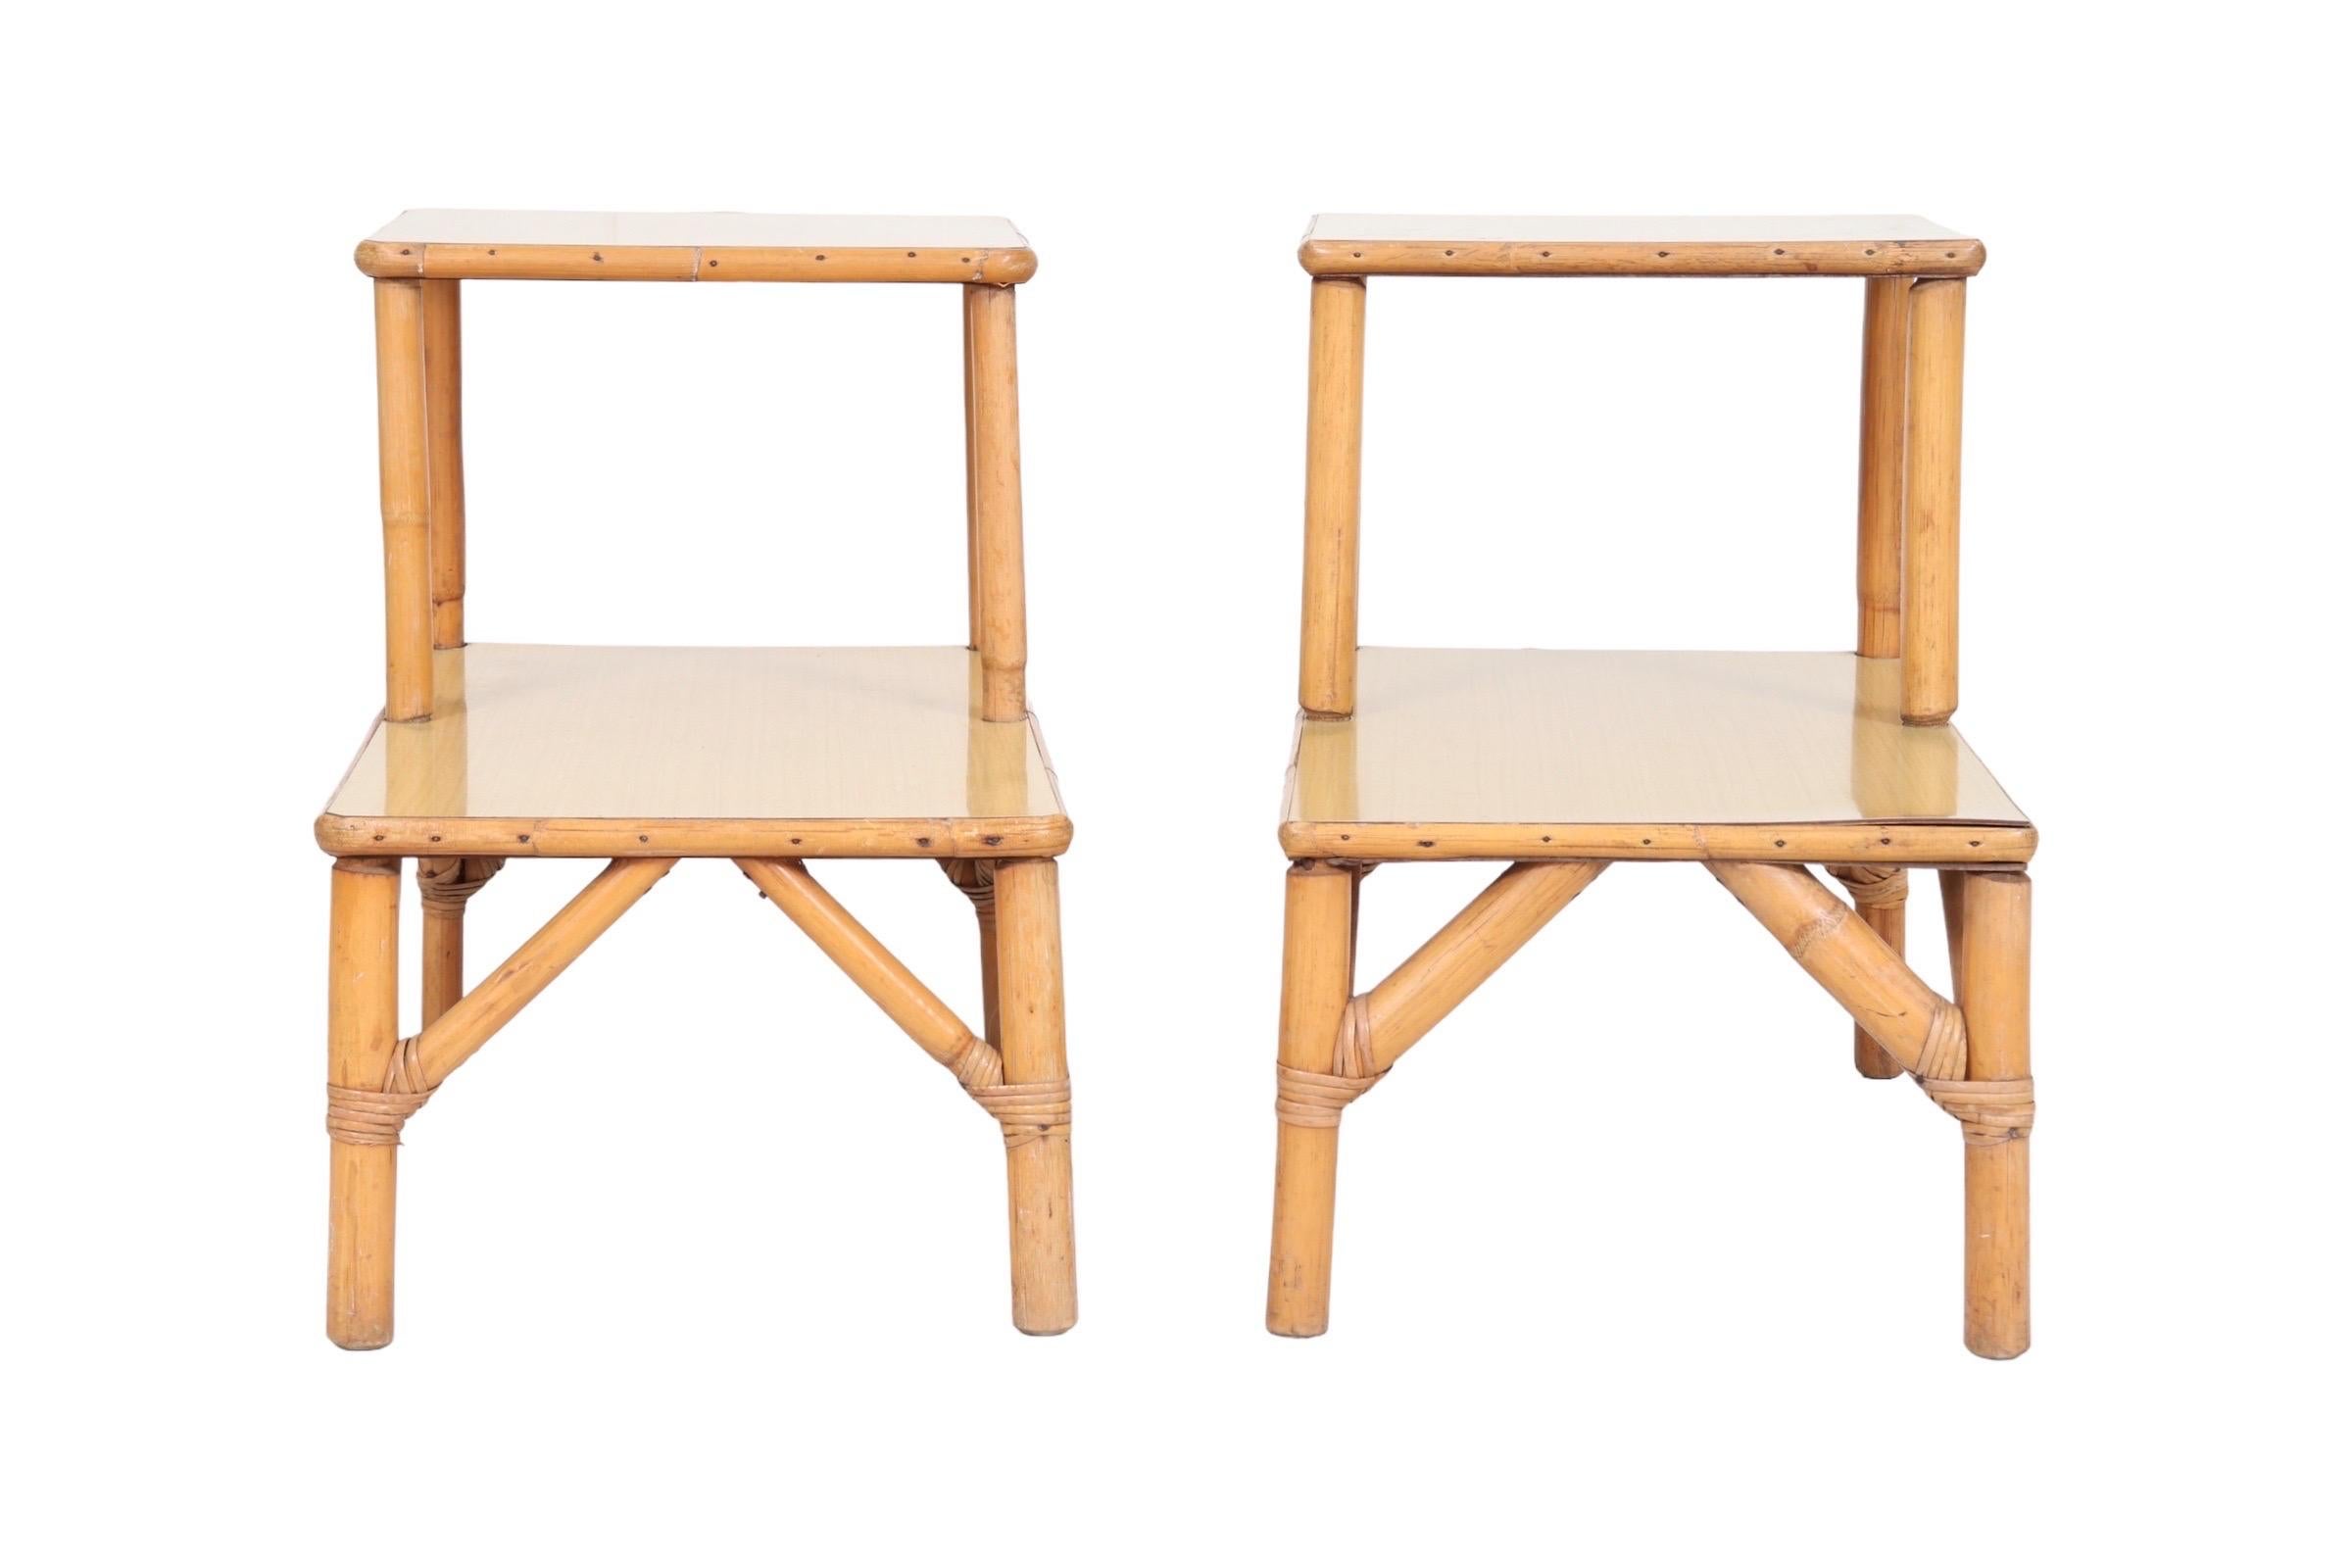 A pair of two-tier side tables made of bamboo. A squared top table over a rectangular lower table, both Formica, are supported on bamboo legs secured with rattan. Dimensions per table.
 